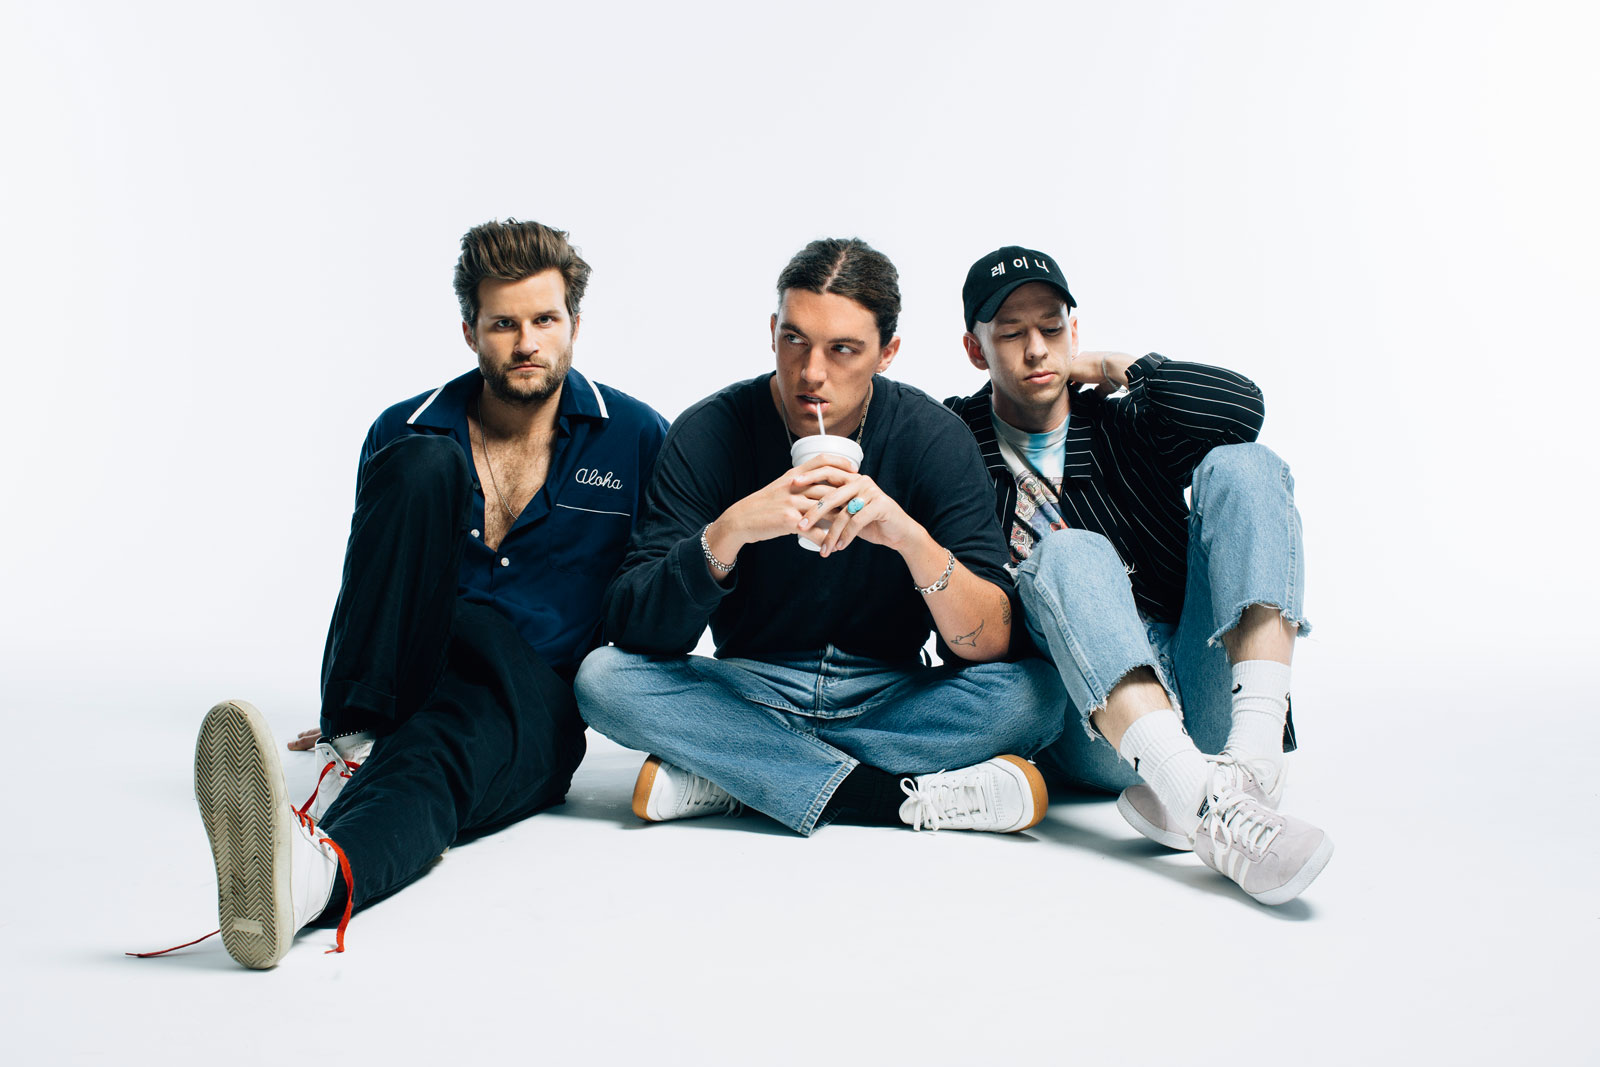 lany-and-music-streaming-services-grew-together